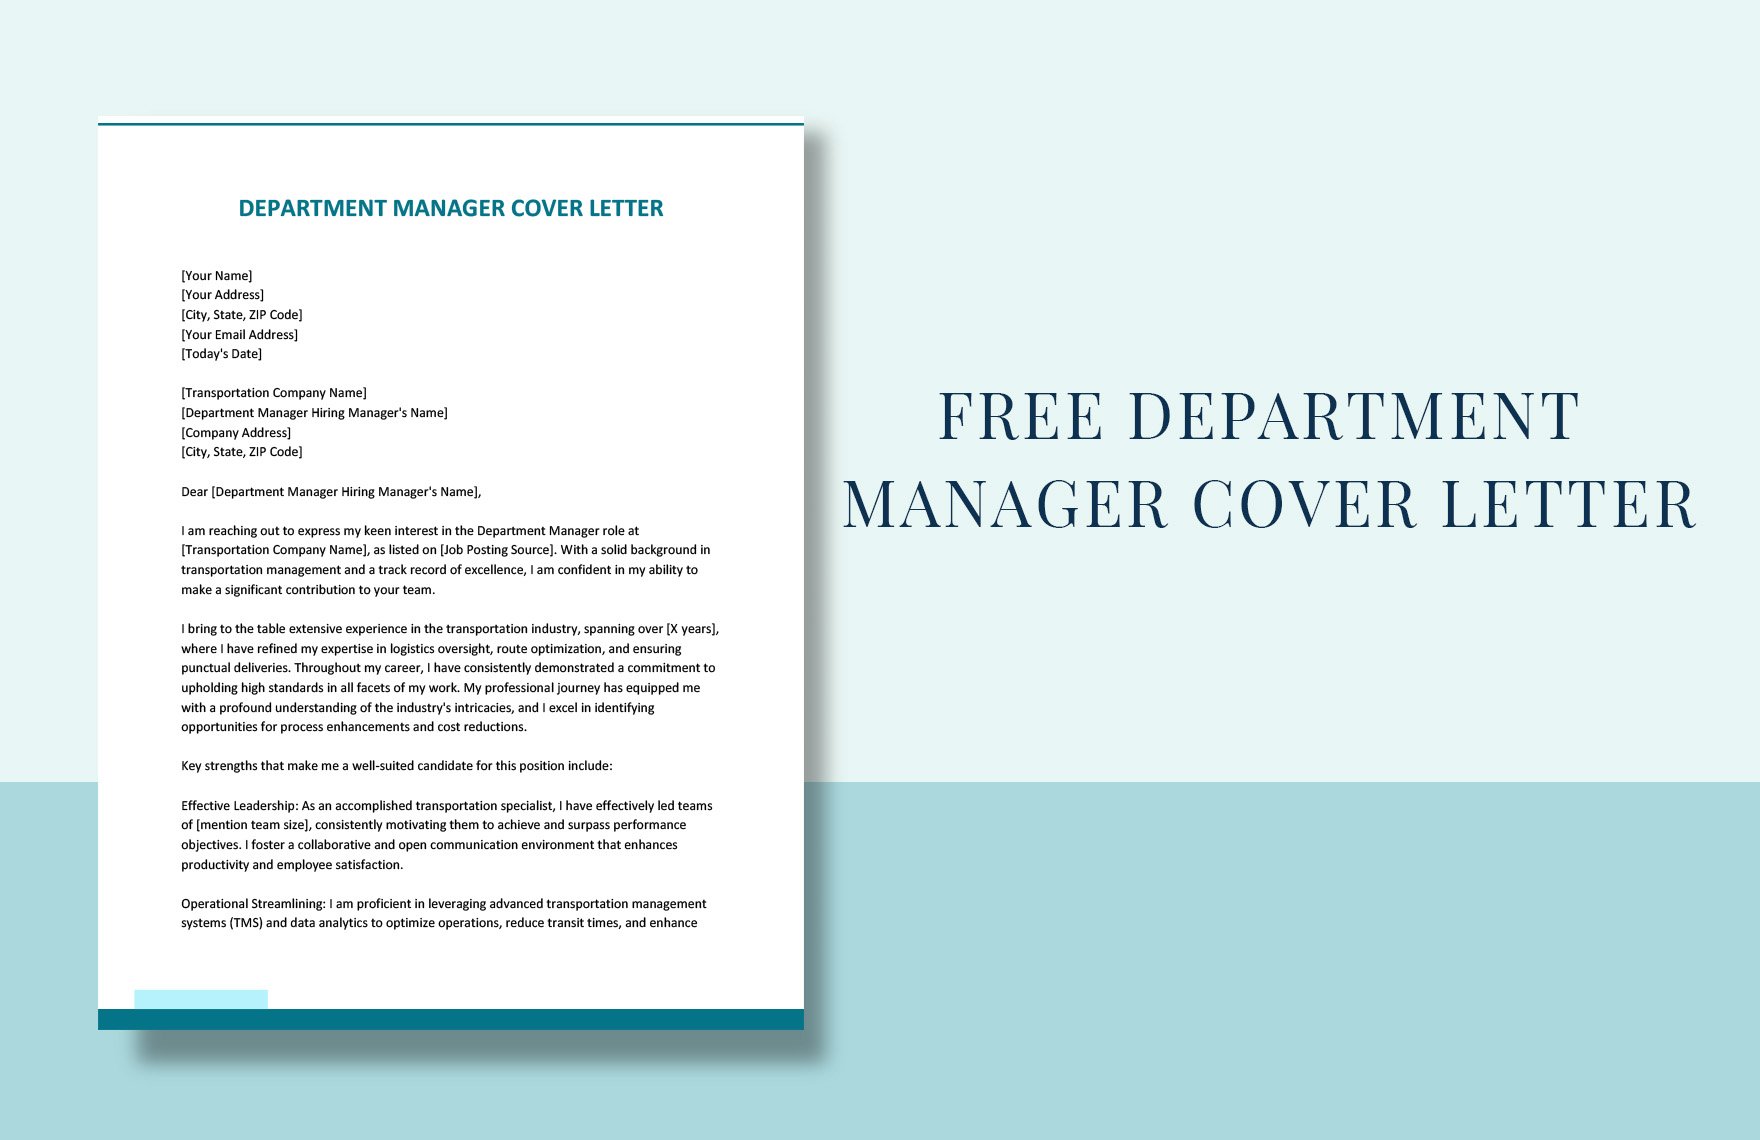 Department Manager Cover Letter